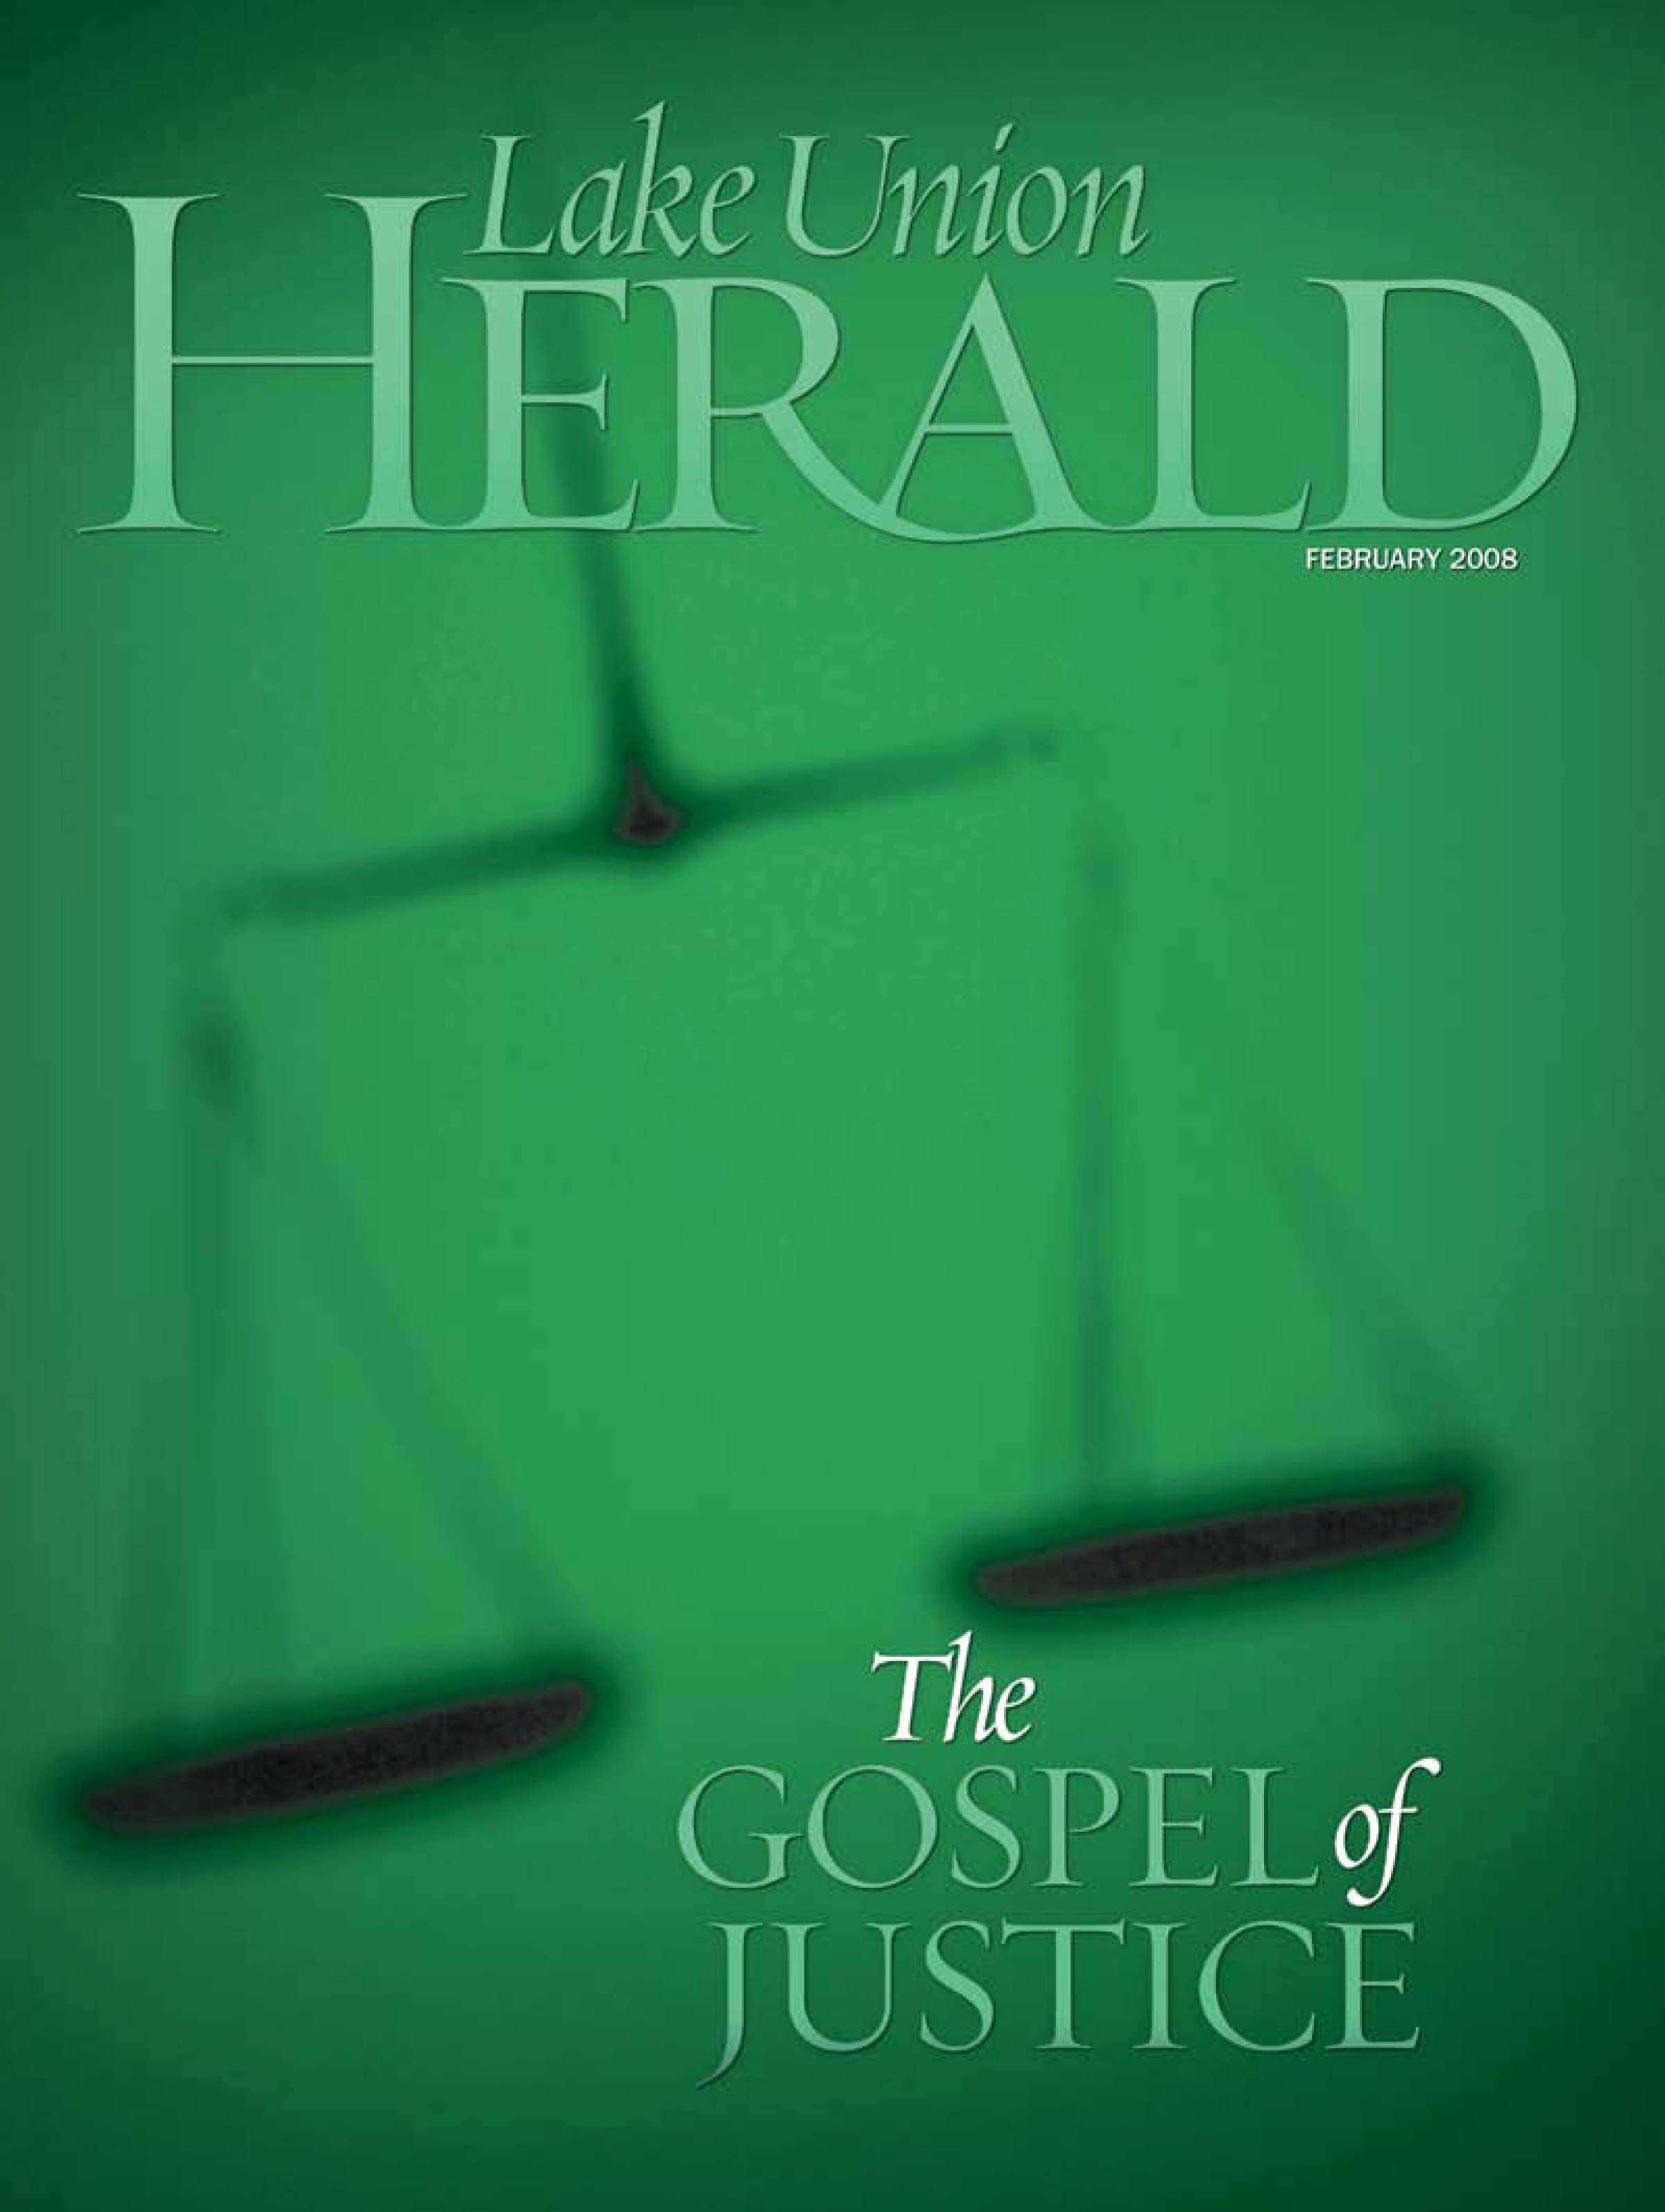 February 2008 Issue